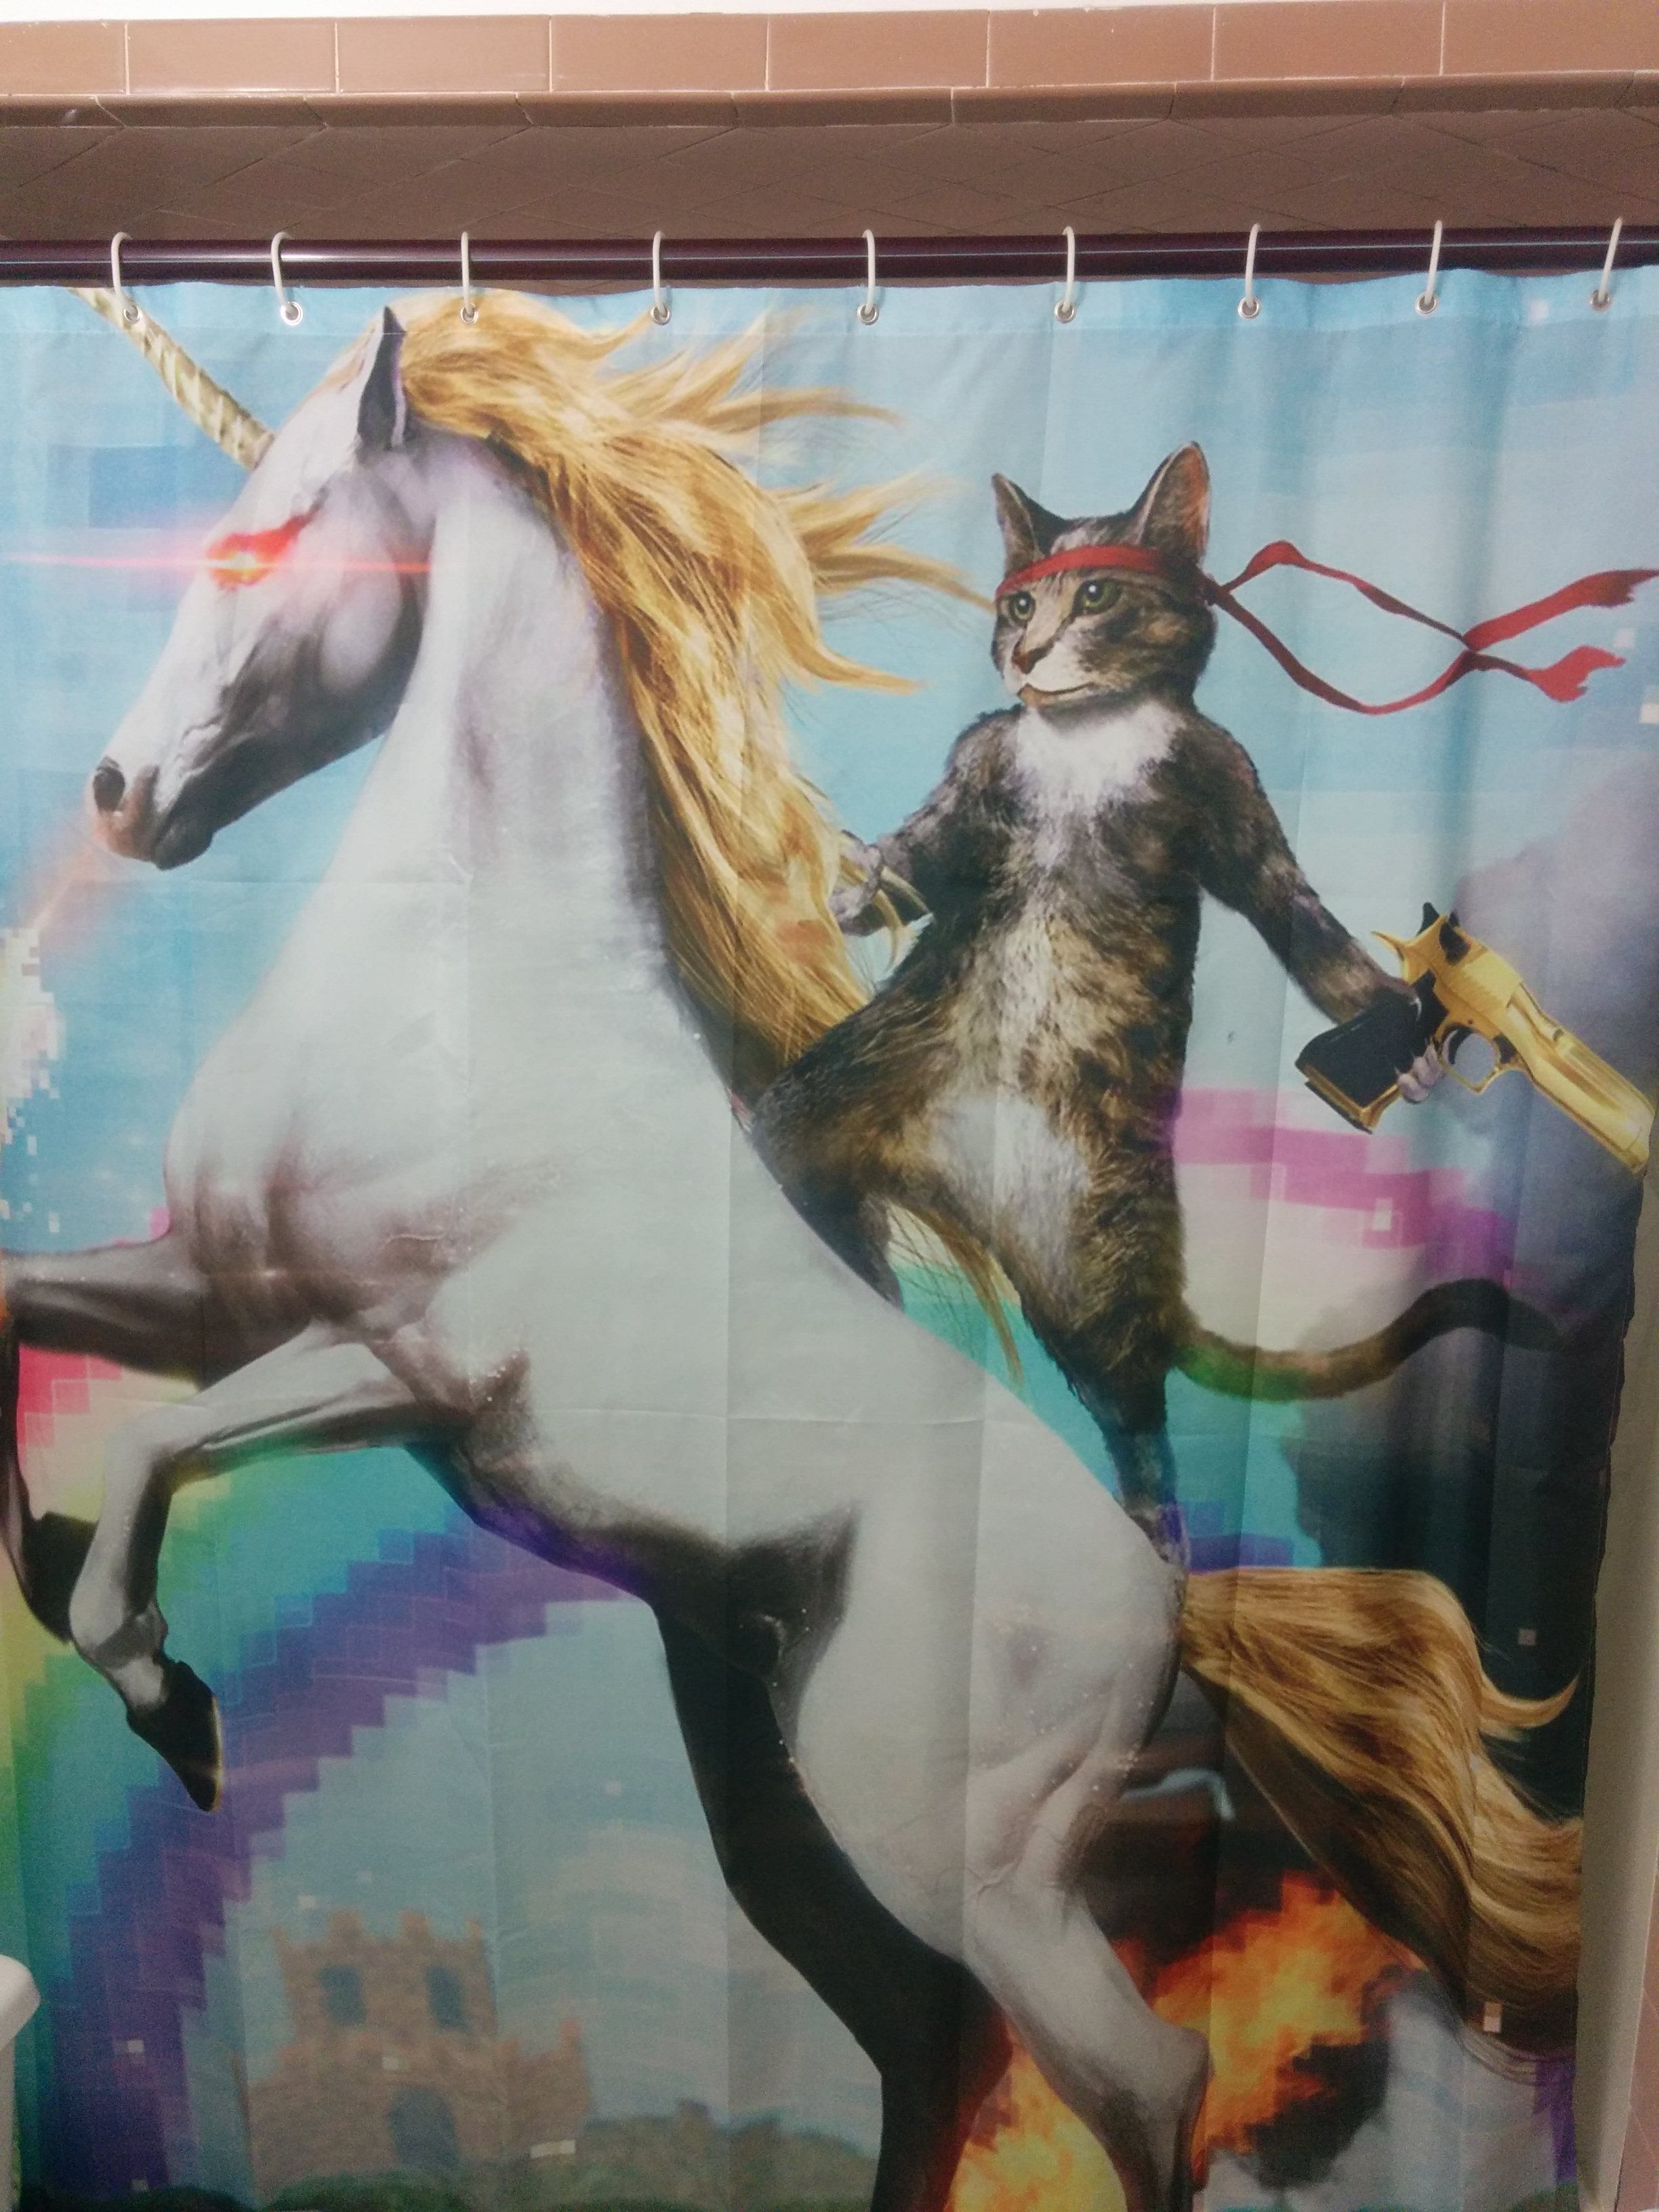 I'm single, I picked my shower curtain, and I want to jump on the bandwagon